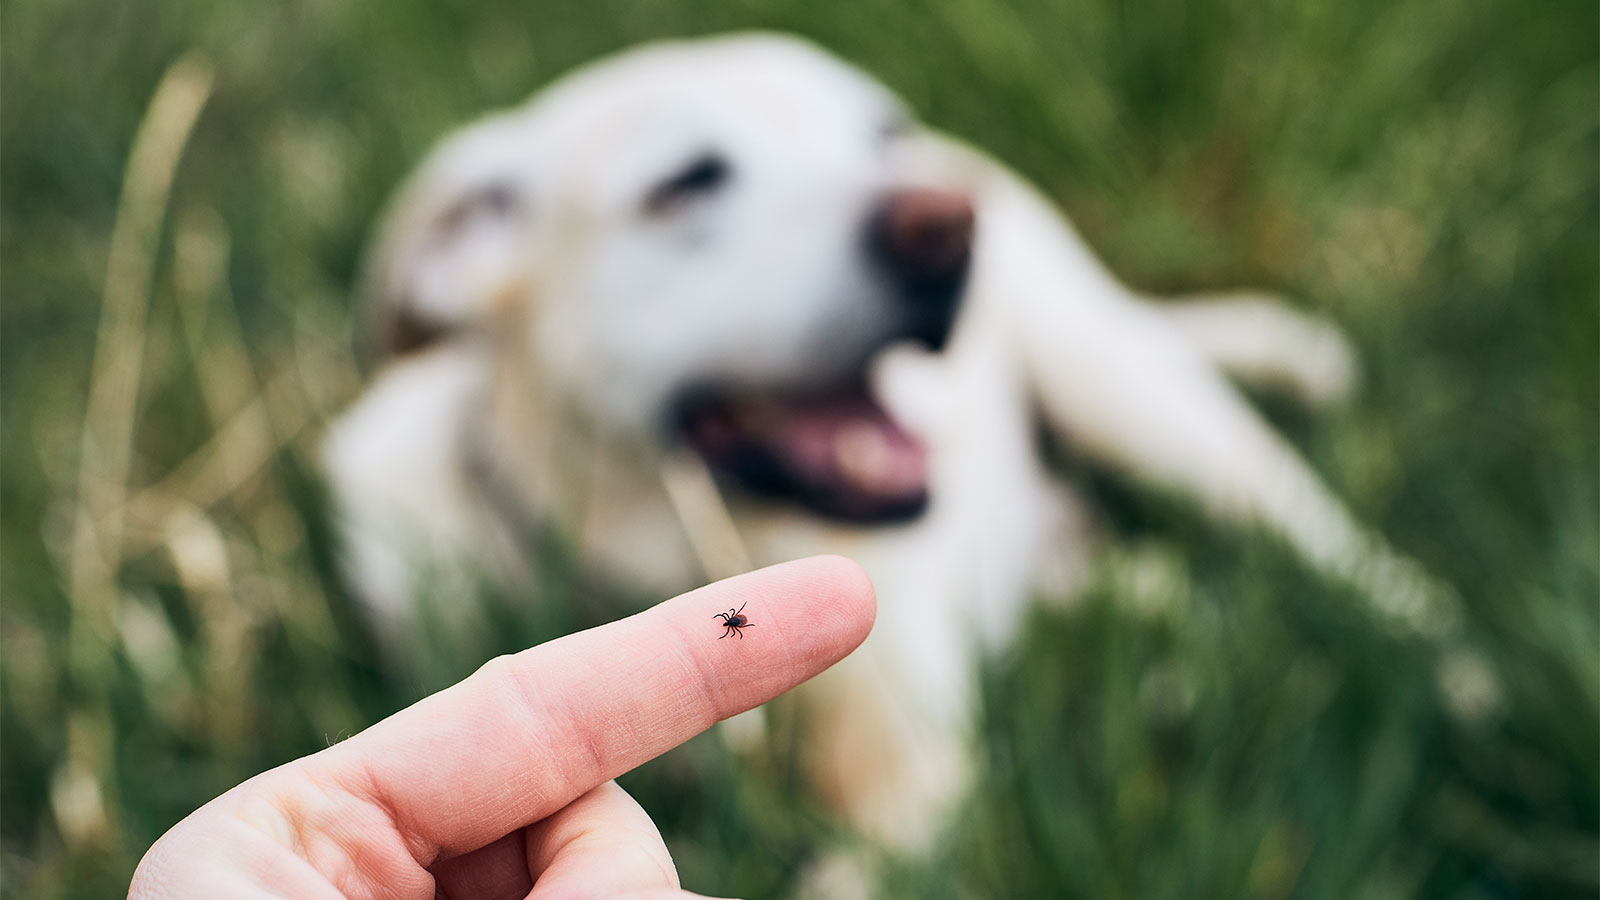 Close-up view of tick on human finger against a background of a dog lying in grass.